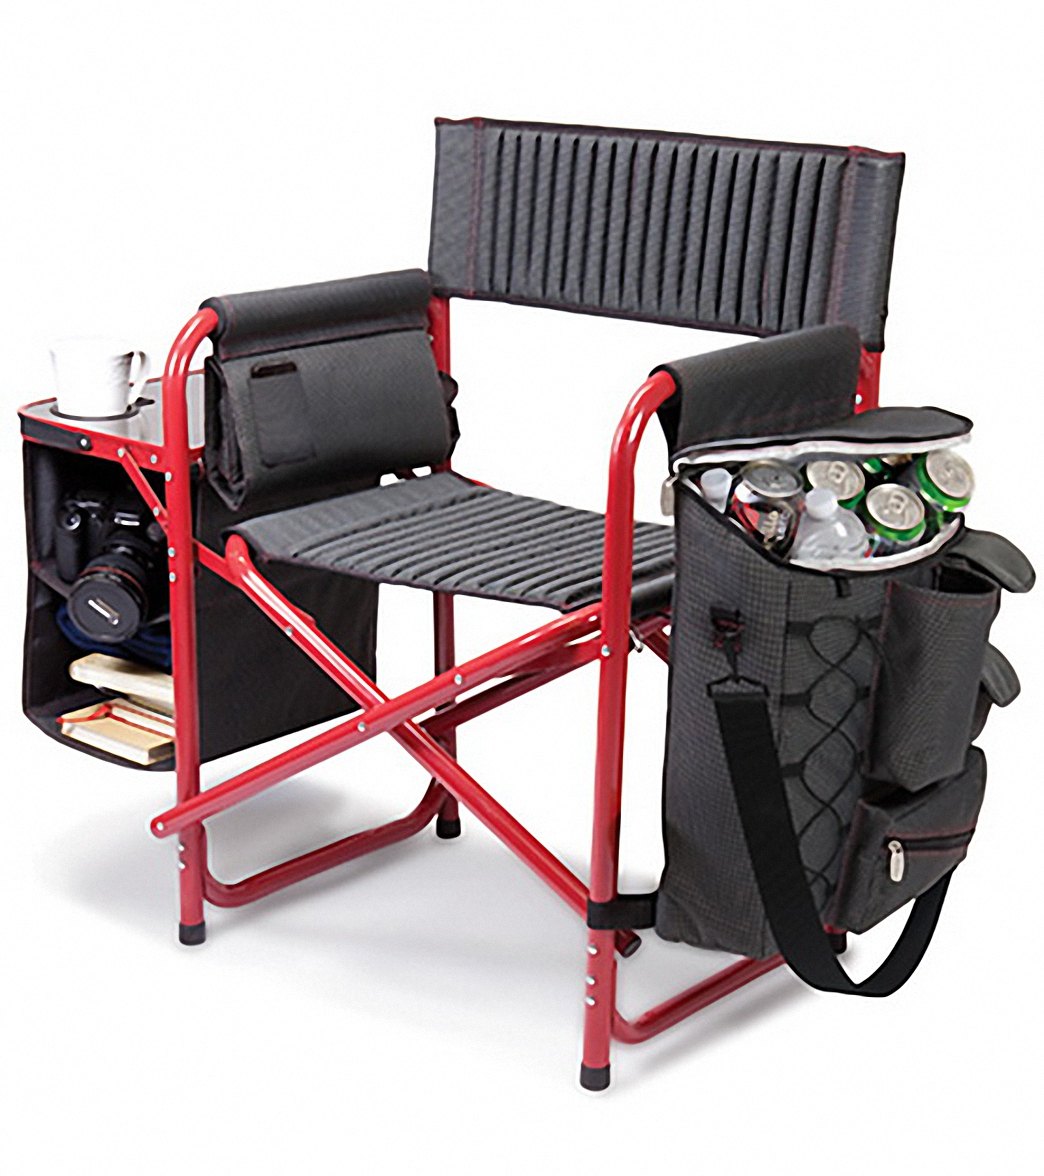 Picnic Time Picnic Fusion Backpack Cooler Chair - Red - Swimoutlet.com